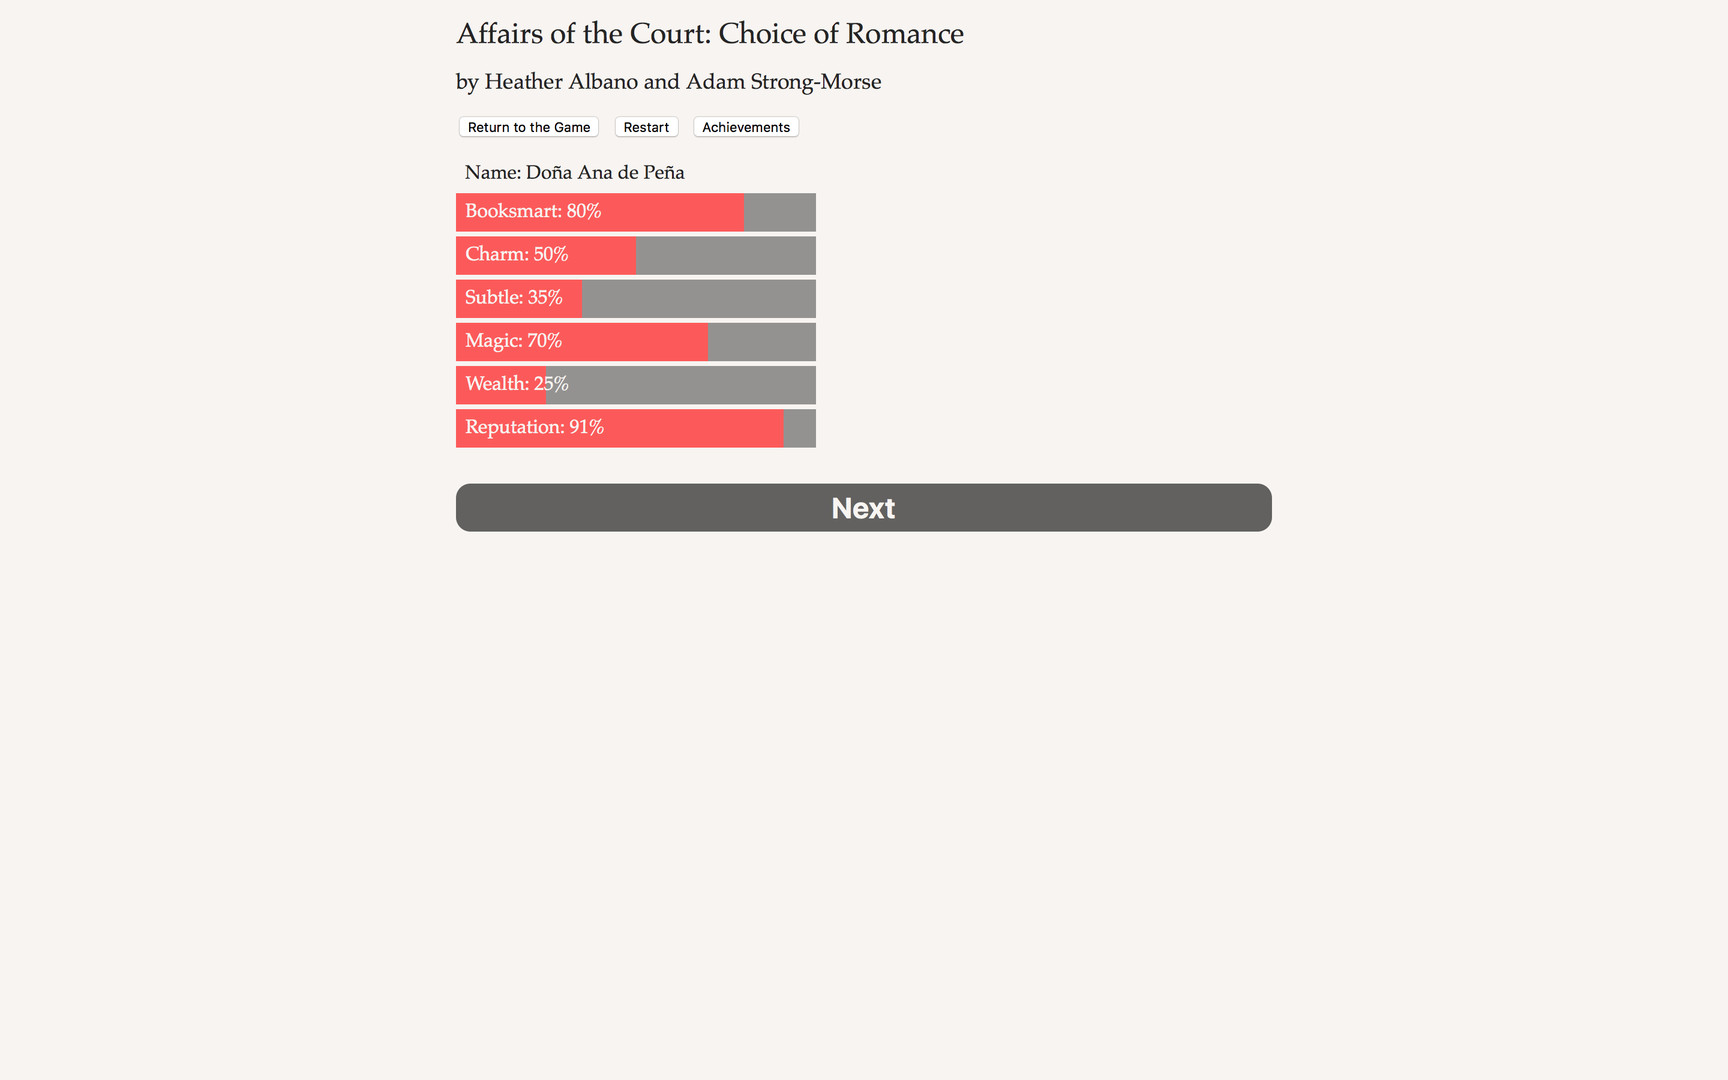 Affairs of the Court: Choice of Romance Featured Screenshot #1